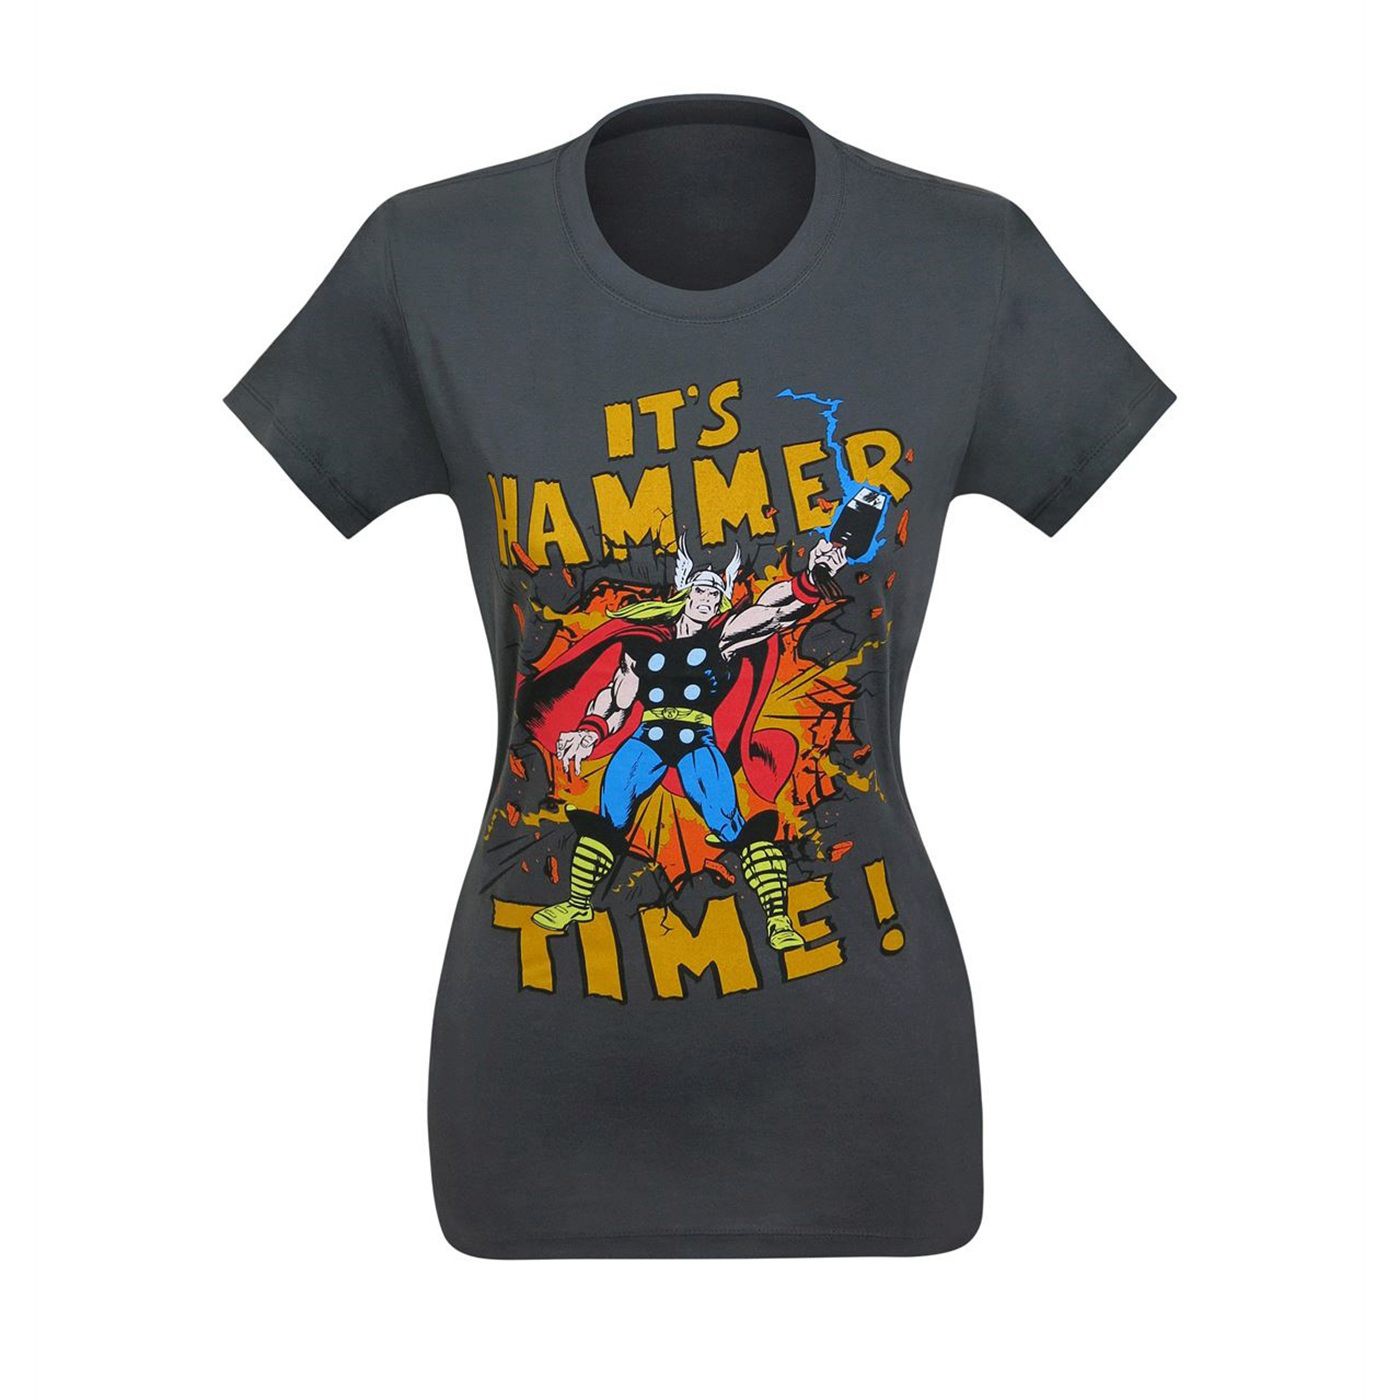 Thor Time of the Hammer Women's T-Shirt